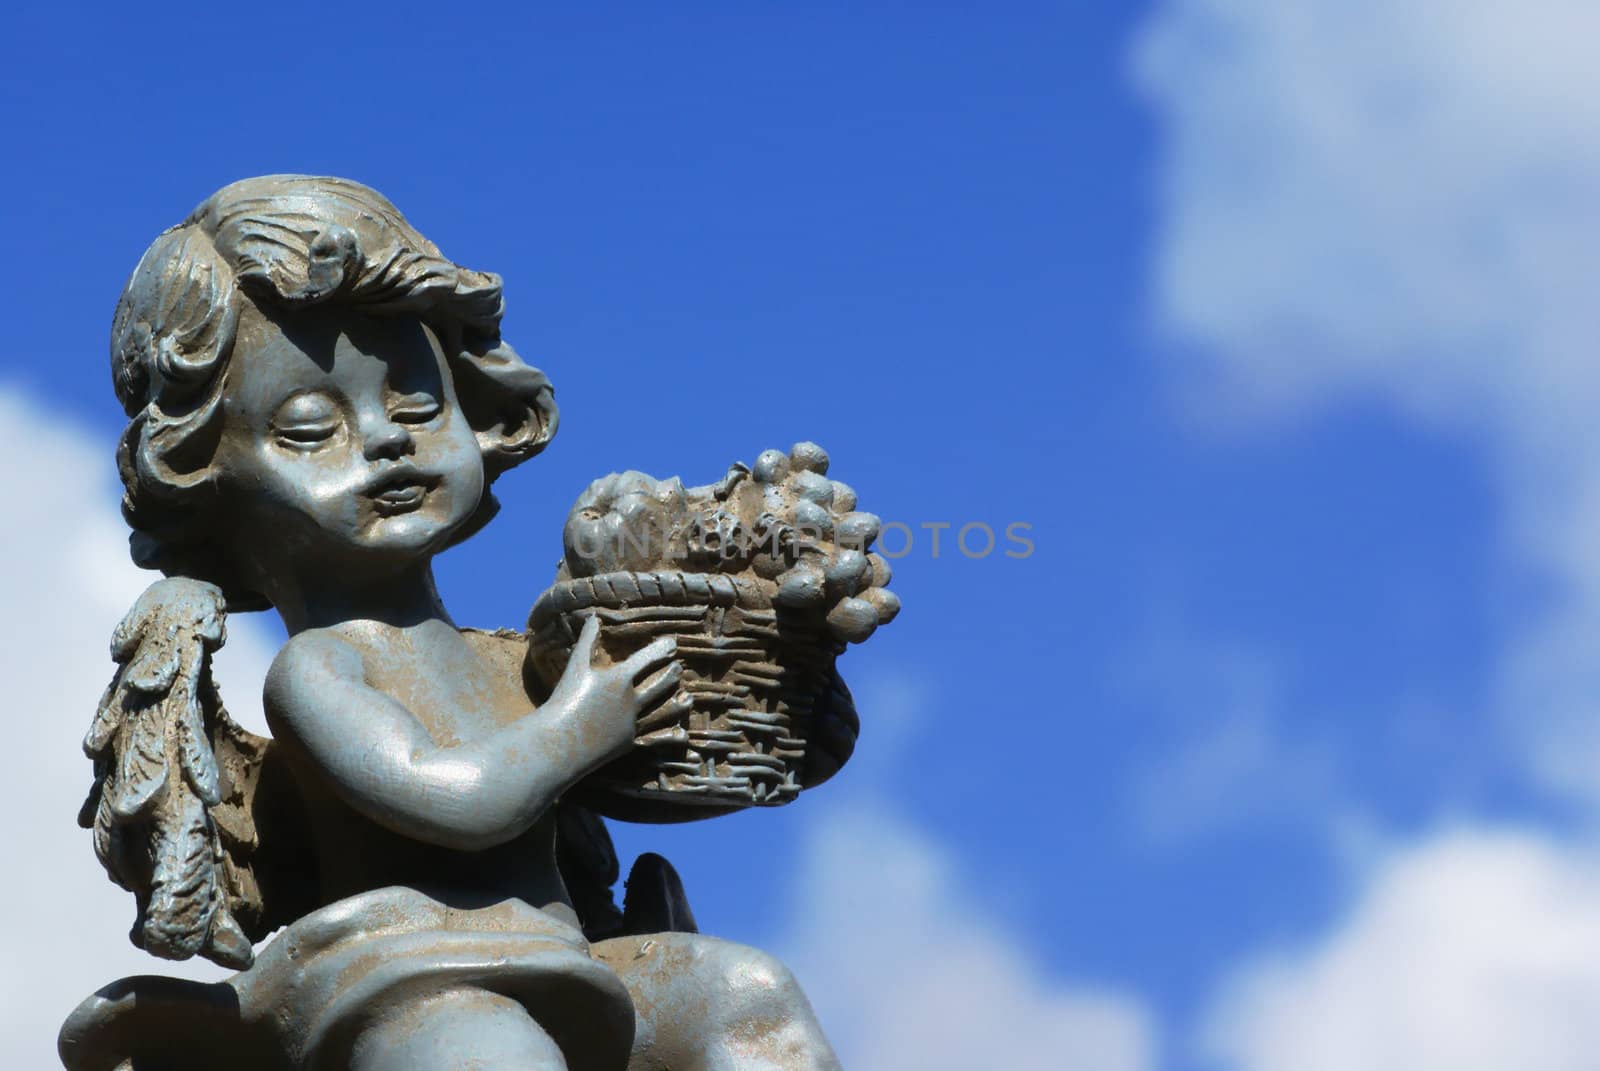 Little angel statue against a blue cloudy sky.